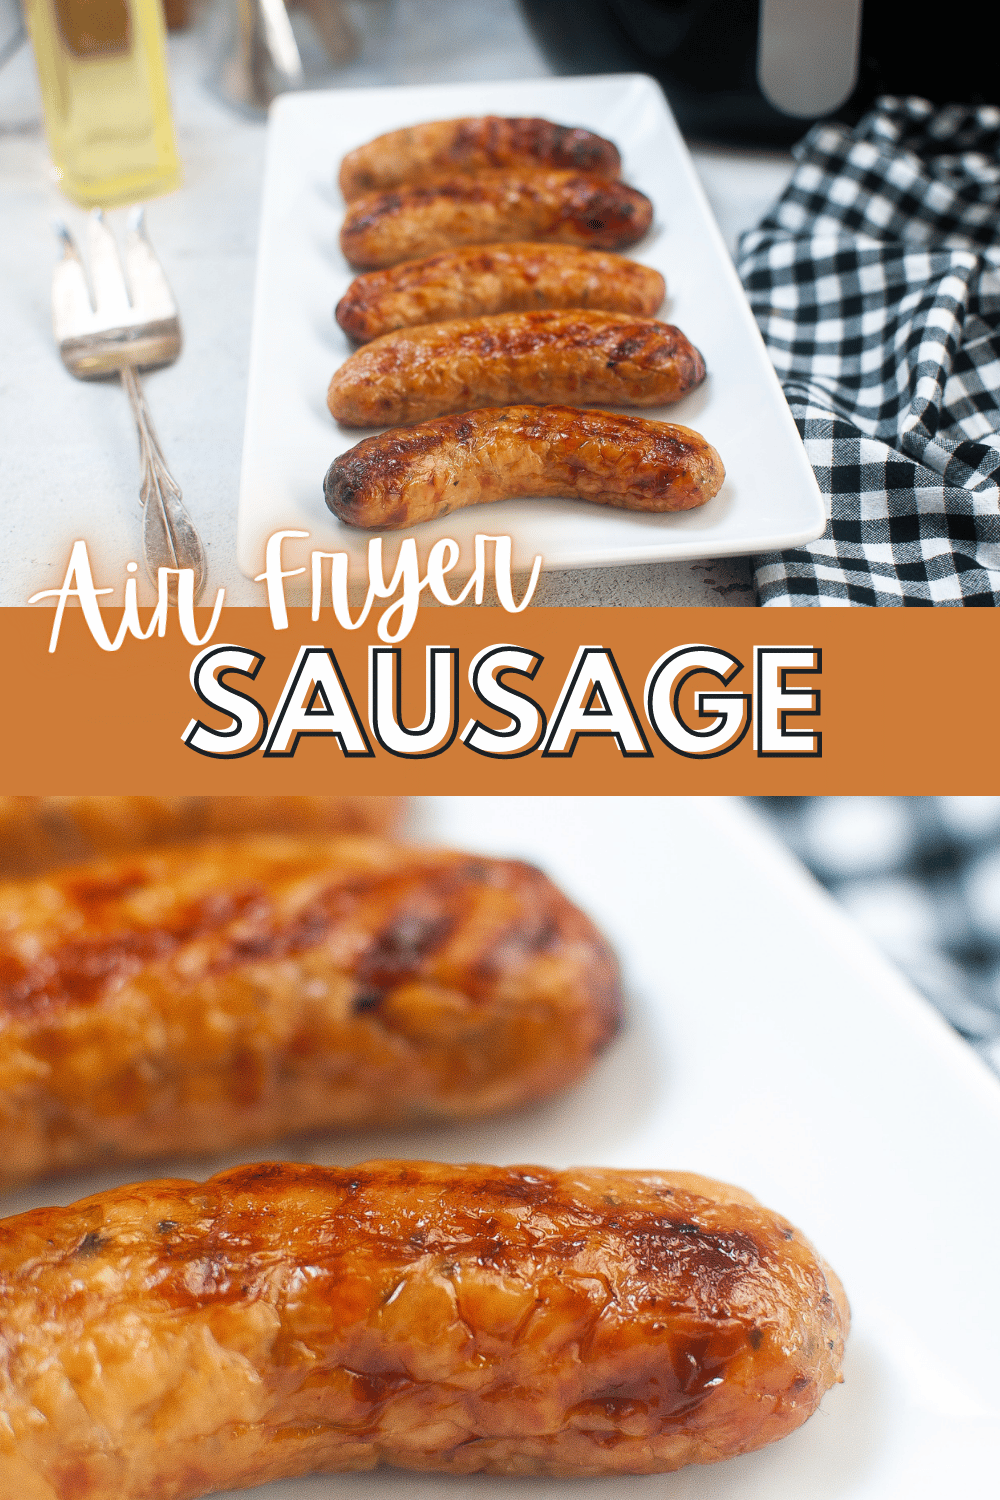 Air Fryer Sausage is a delicious, healthy, easy-to-make meal that can be enjoyed any time. Serve as is or with your favorite dipping sauce. #airfryersausage #airfryer #sausage #sausagelinks via @wondermomwannab